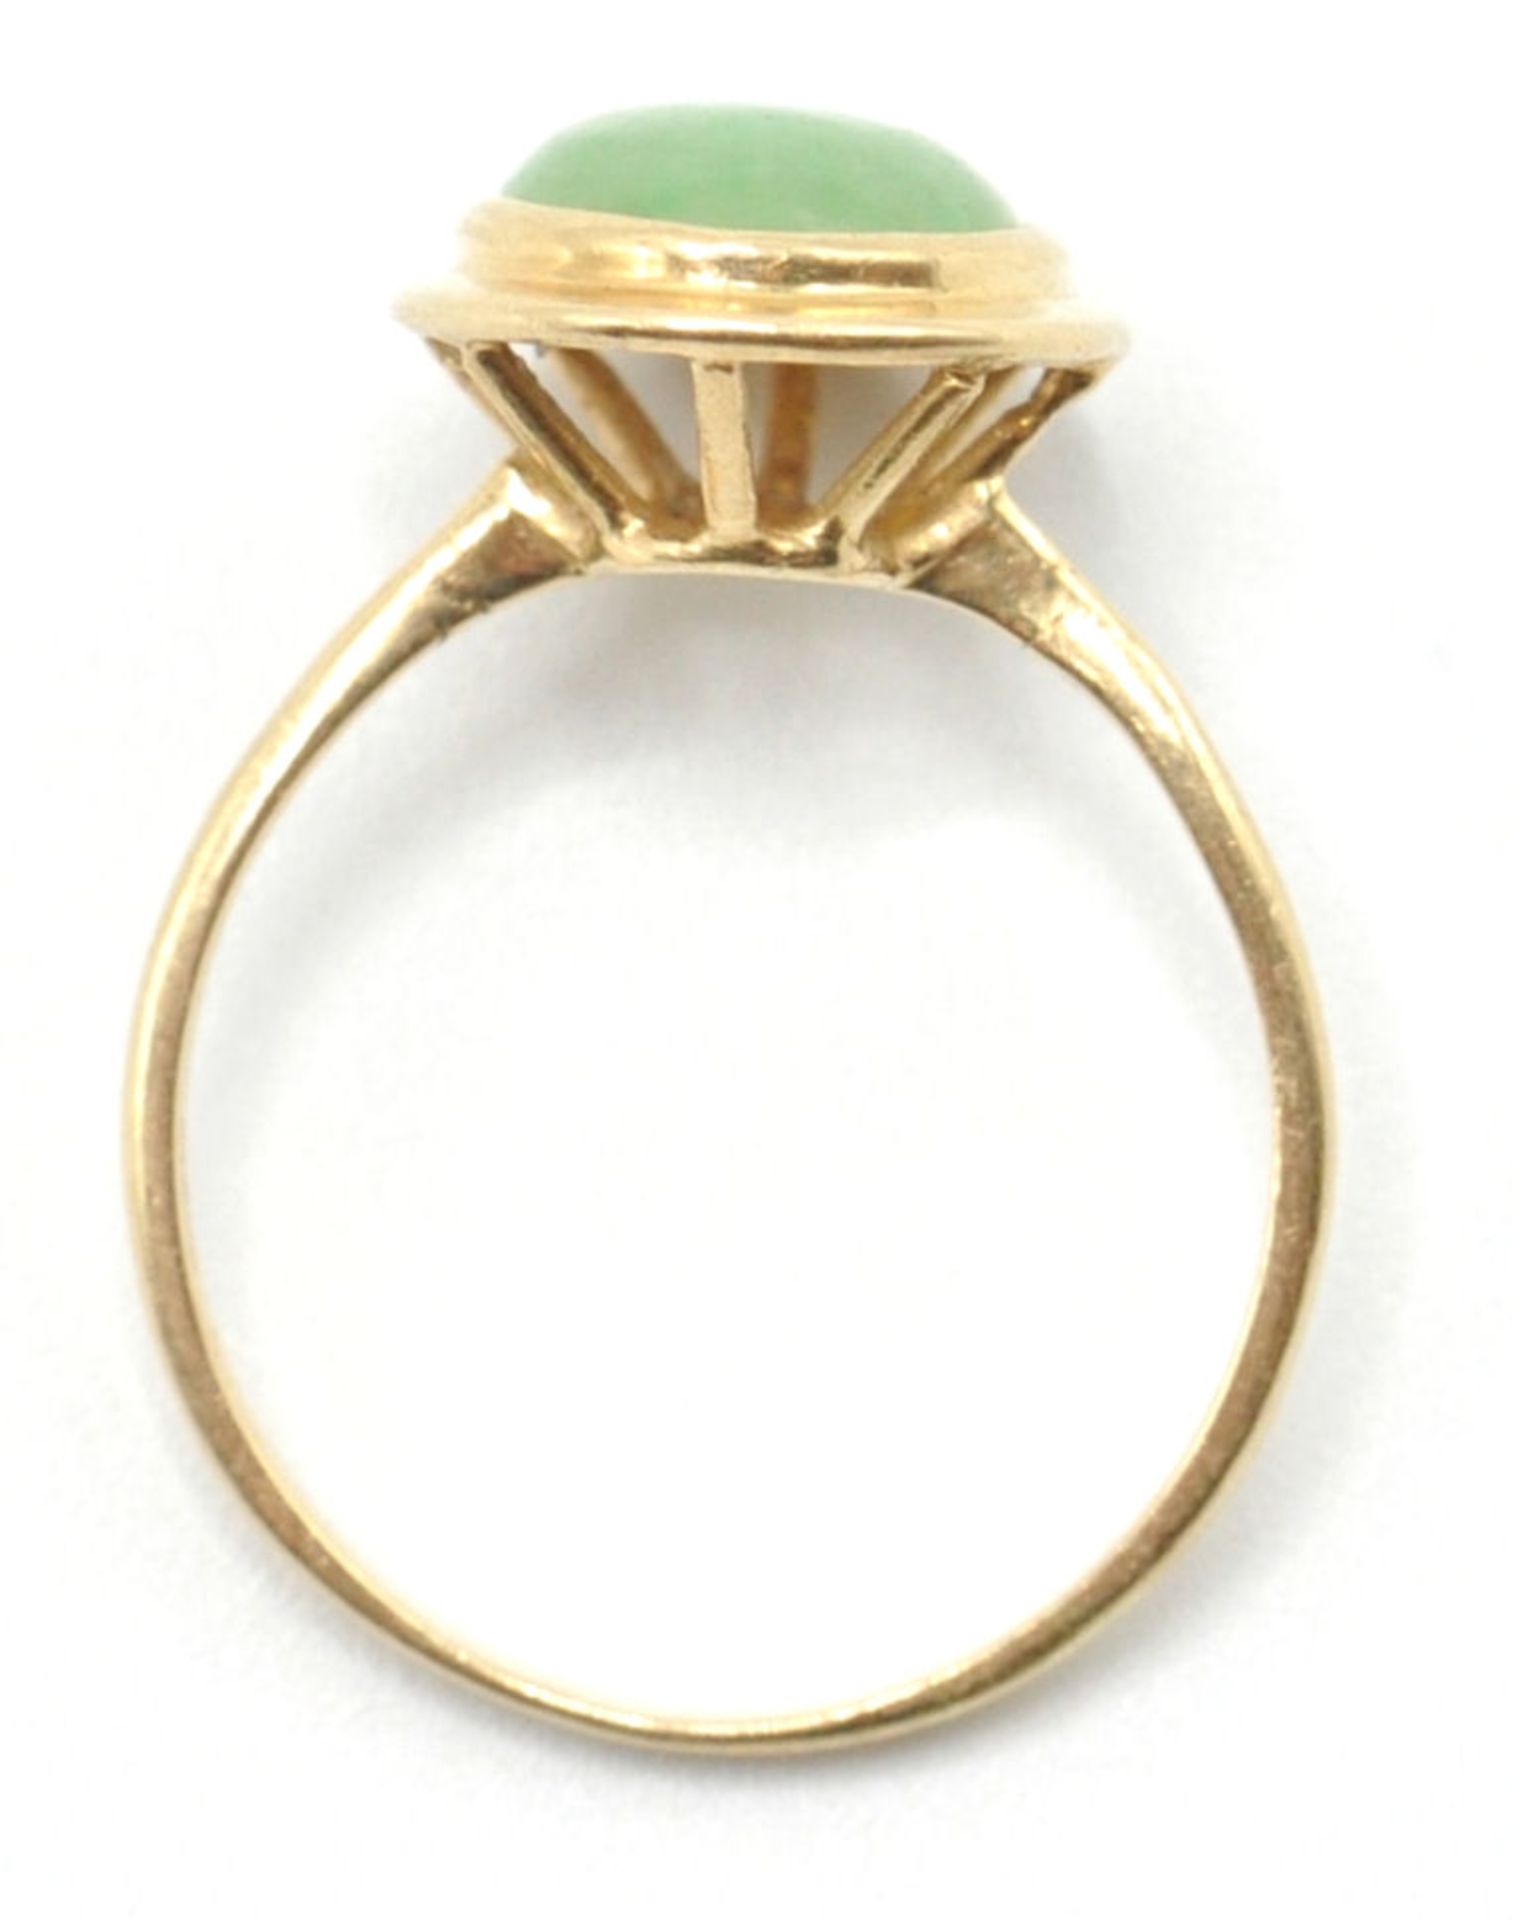 A stamped 585 14ct gold ring being set with an oval jade cabochon in a bezel setting. Weight 2.8g. - Bild 7 aus 7